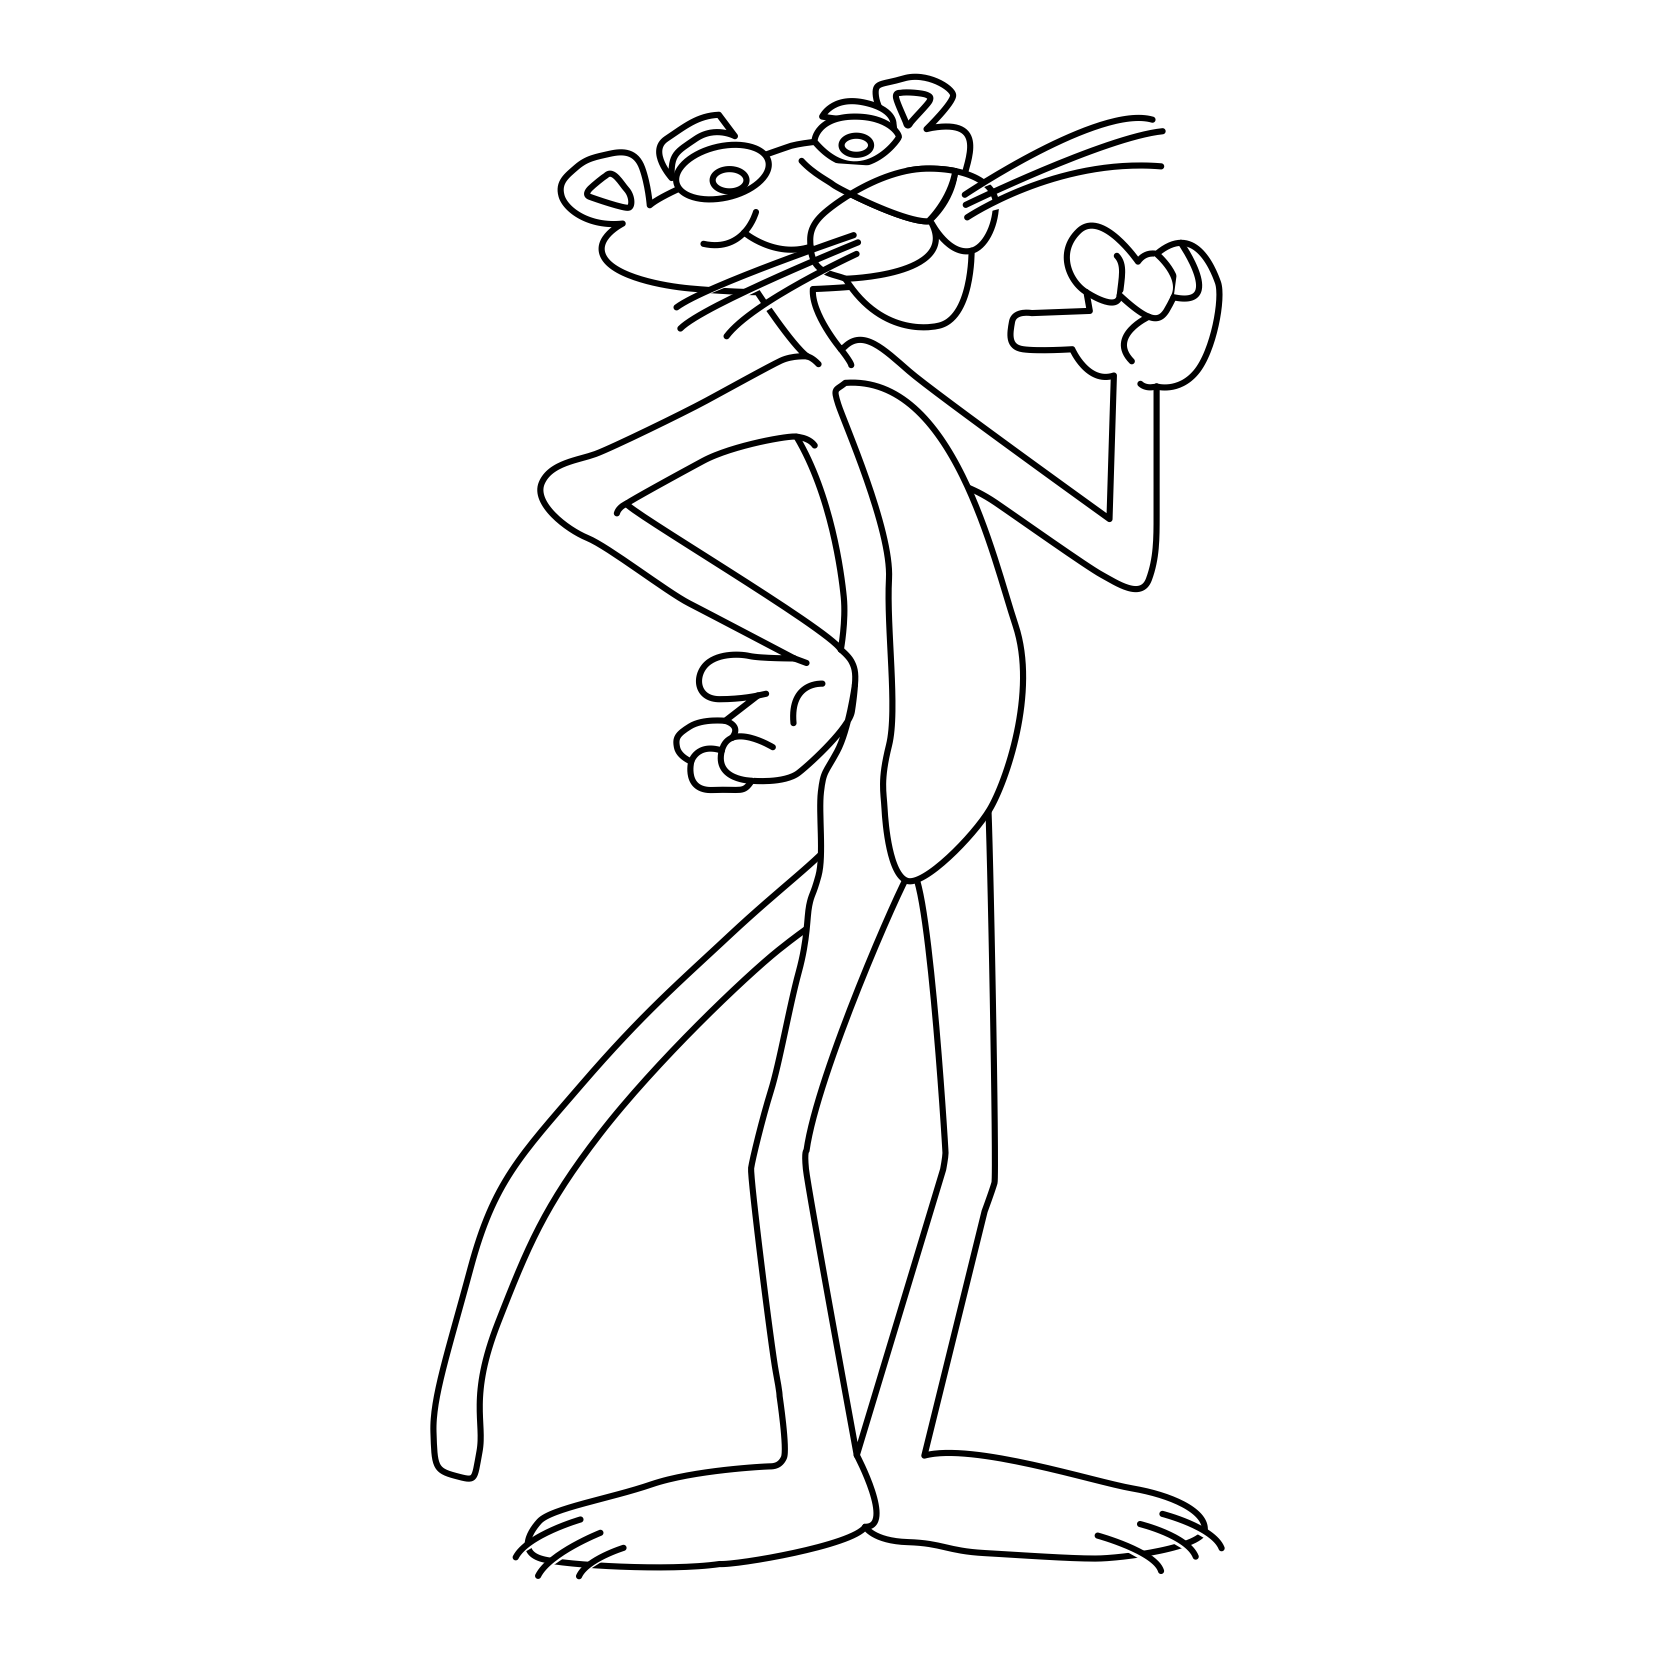 Download Free Printable Pink Panther Coloring Pages For Kids